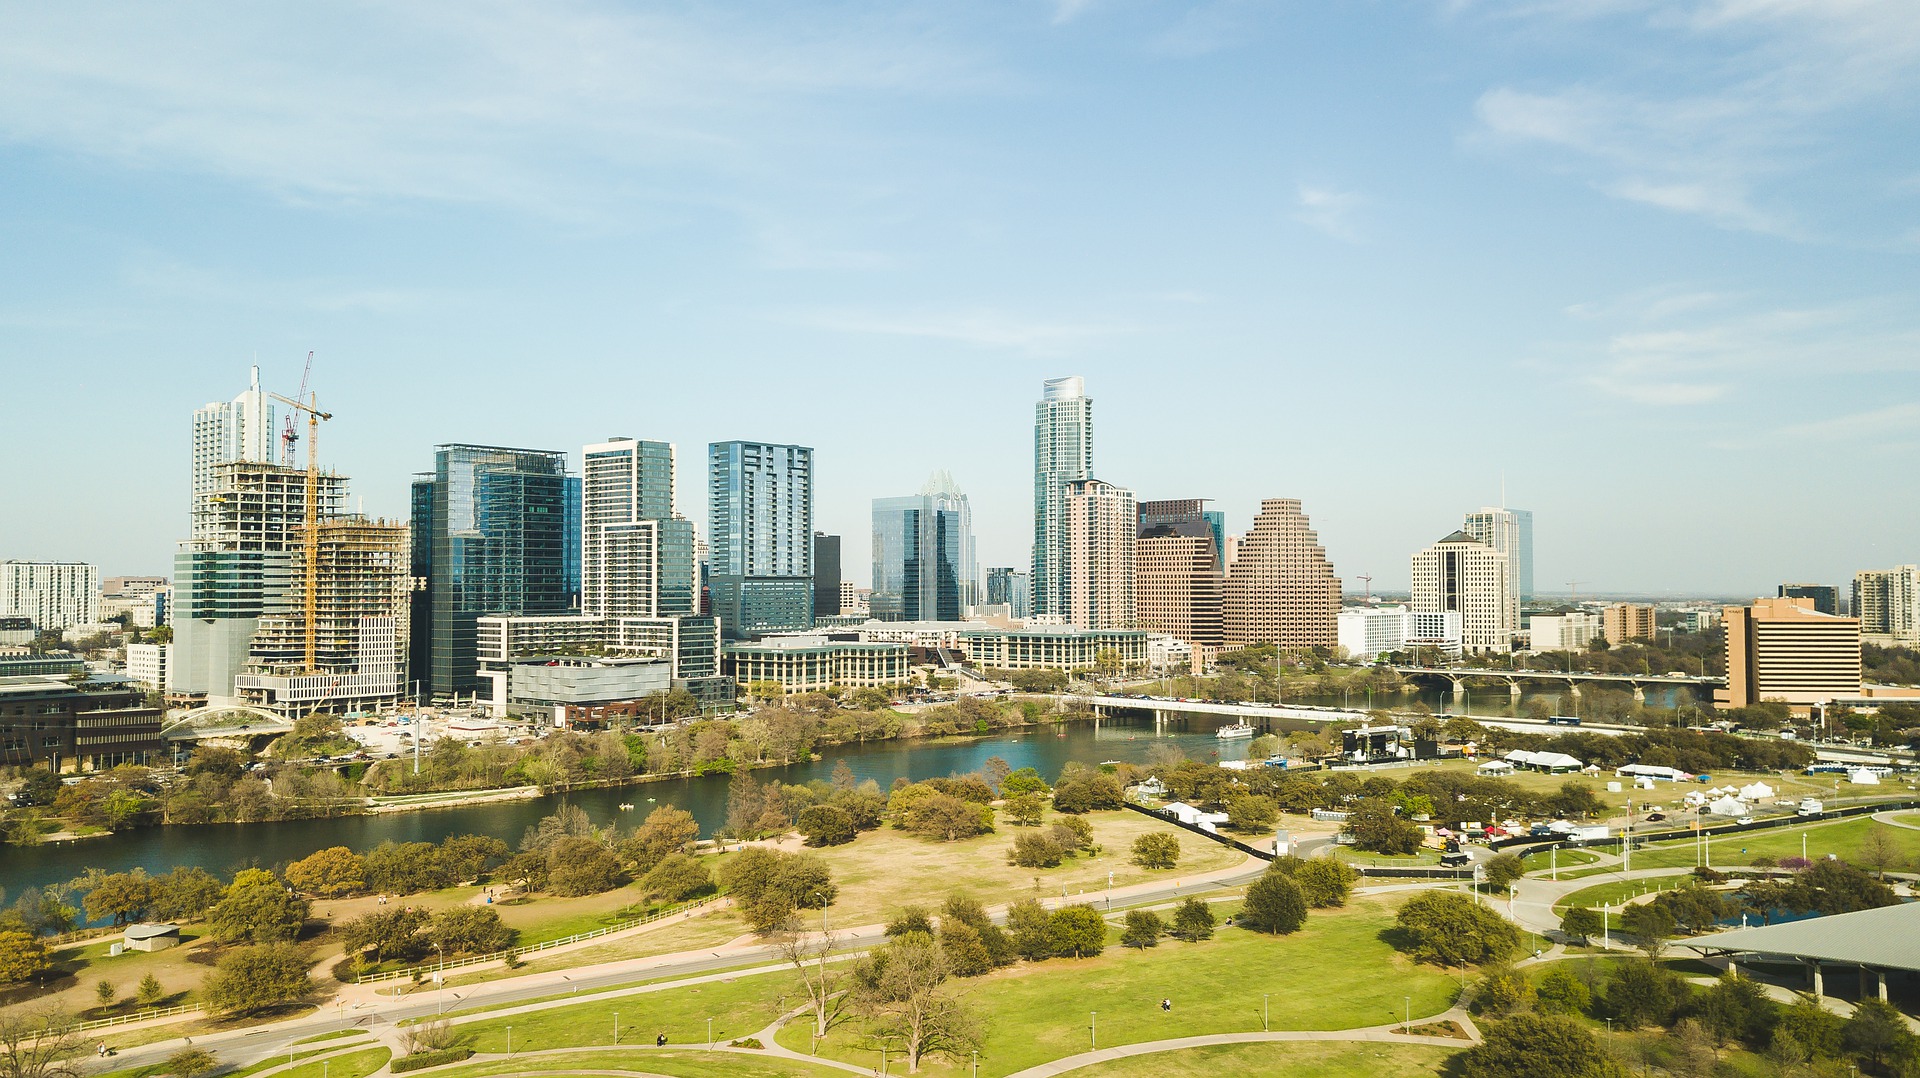 NAI Partners Investment Sales Team brokers sale of 2.63 acres in Austin Partners Real Estate